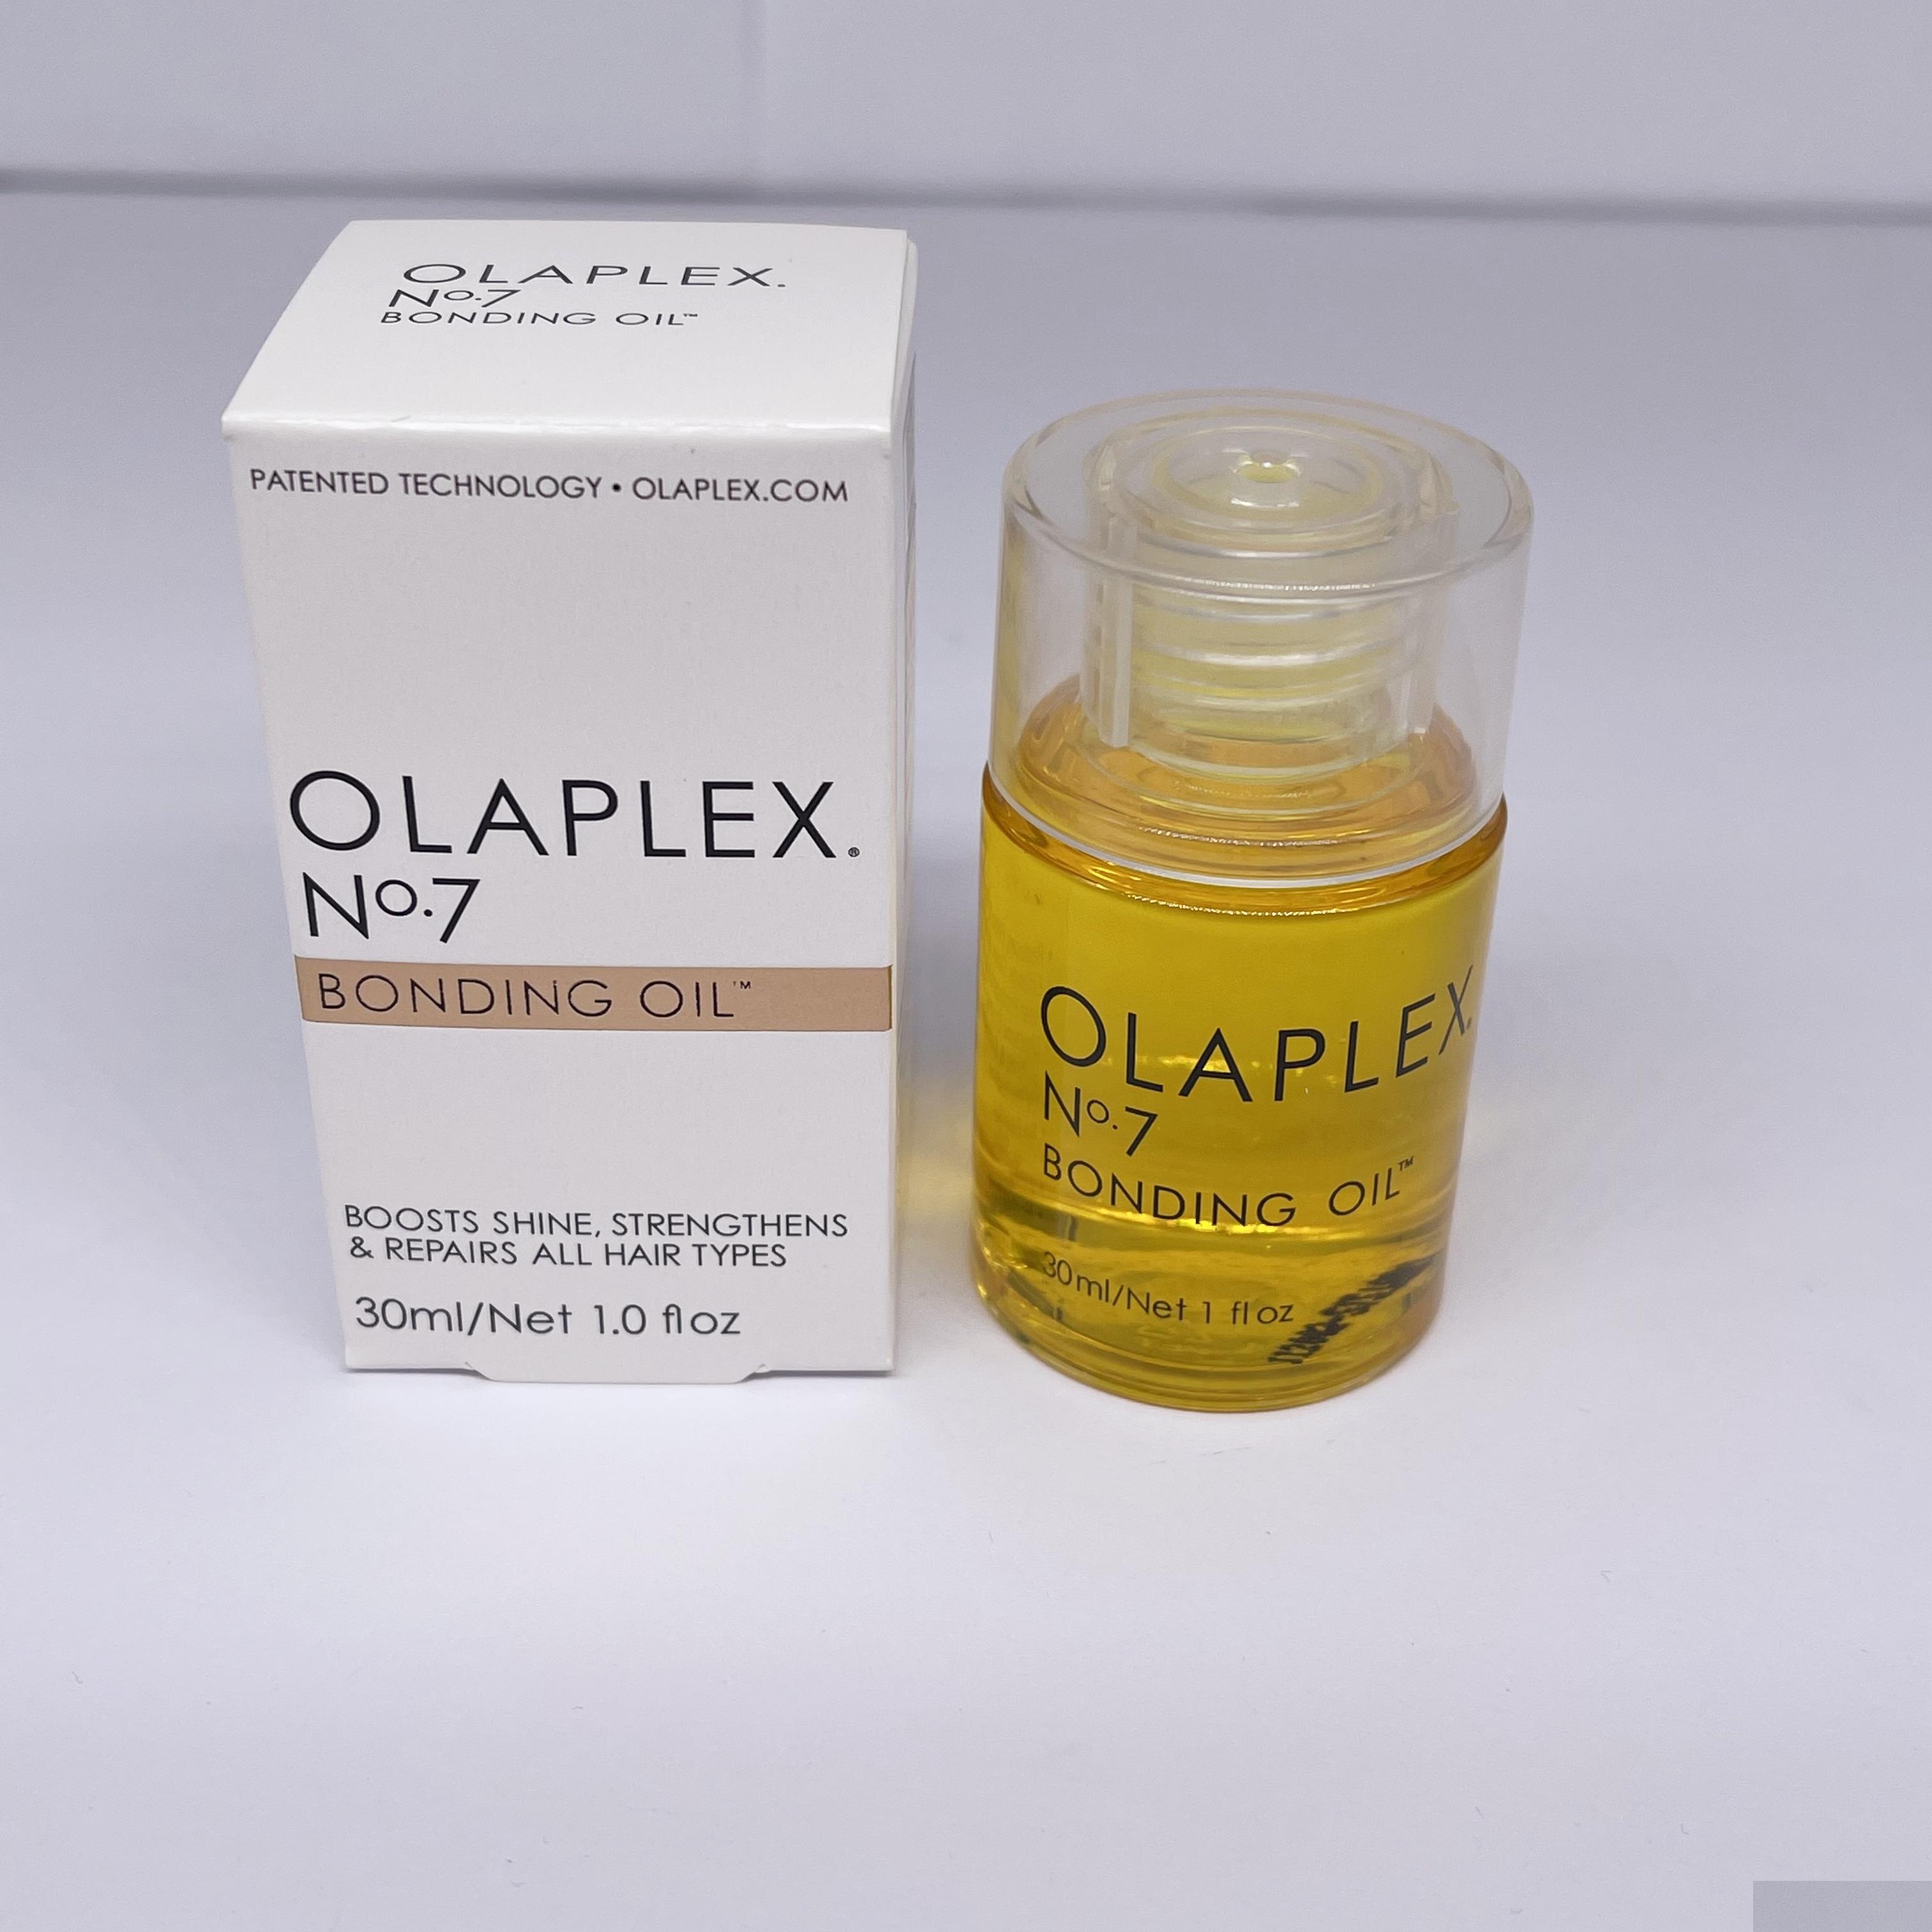 

Shampoo Conditioner Olaplex Hair Oil 30Ml N7 Bonding Oils Conditioner Boosts Shine Repair Strengthens All Hairs Types Smoother Essen Dhpxi